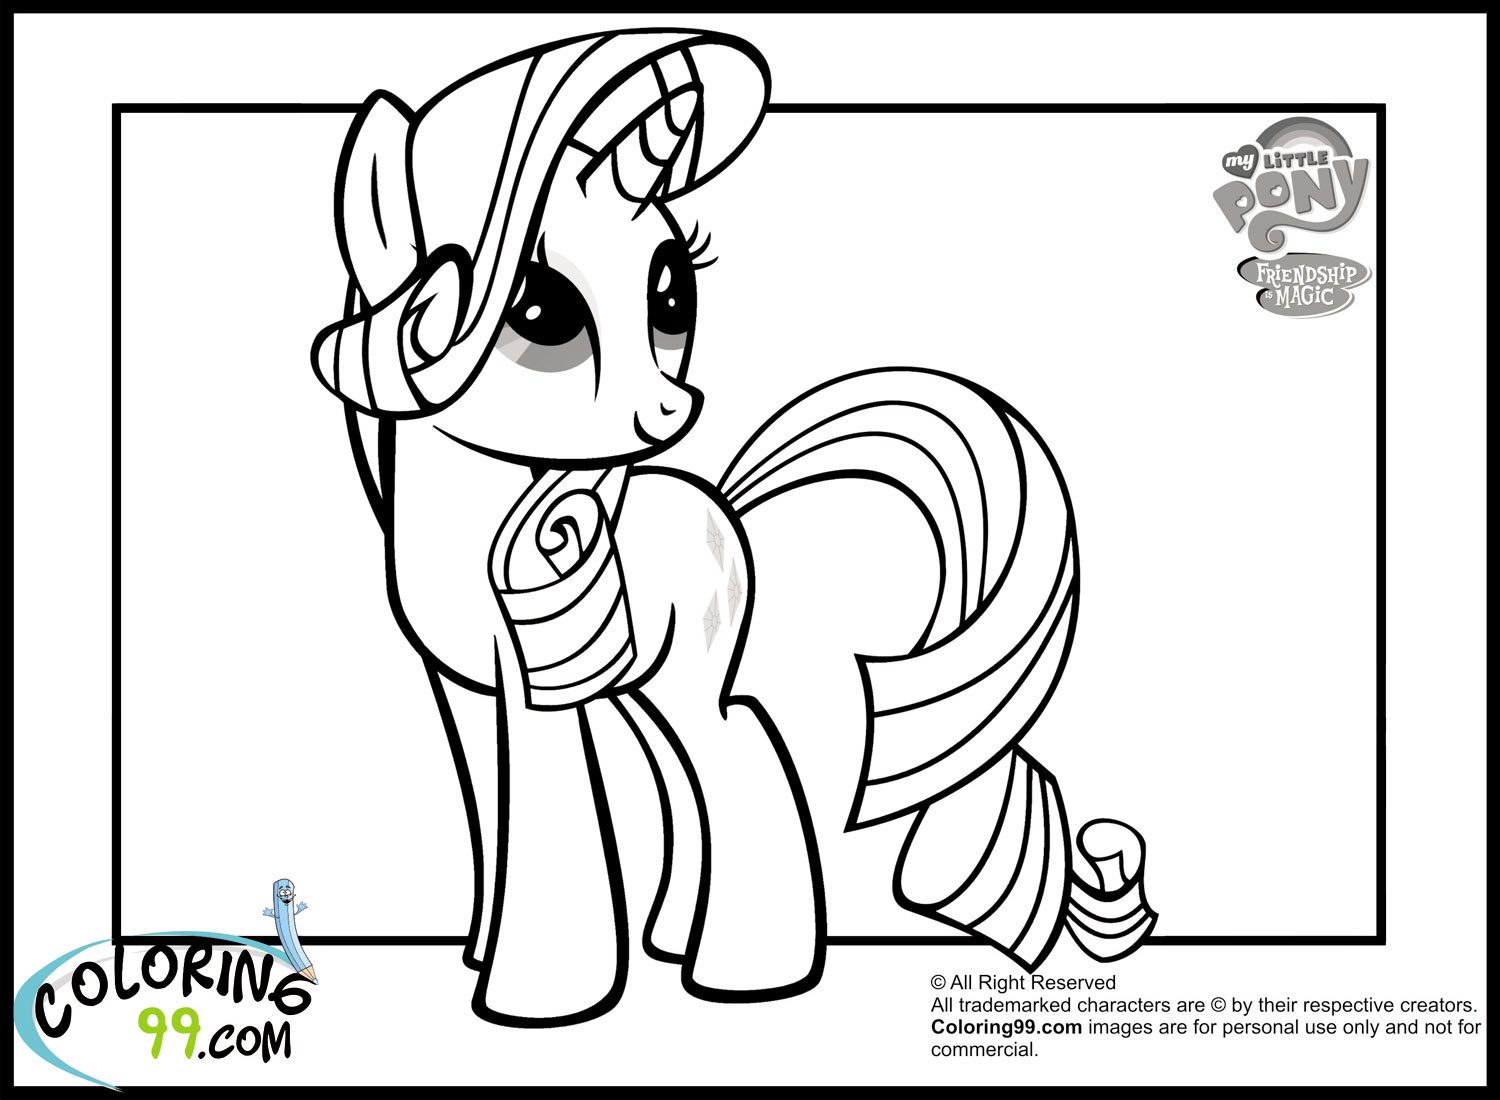 Rarity, Coloring pages and Coloring on Pinterest